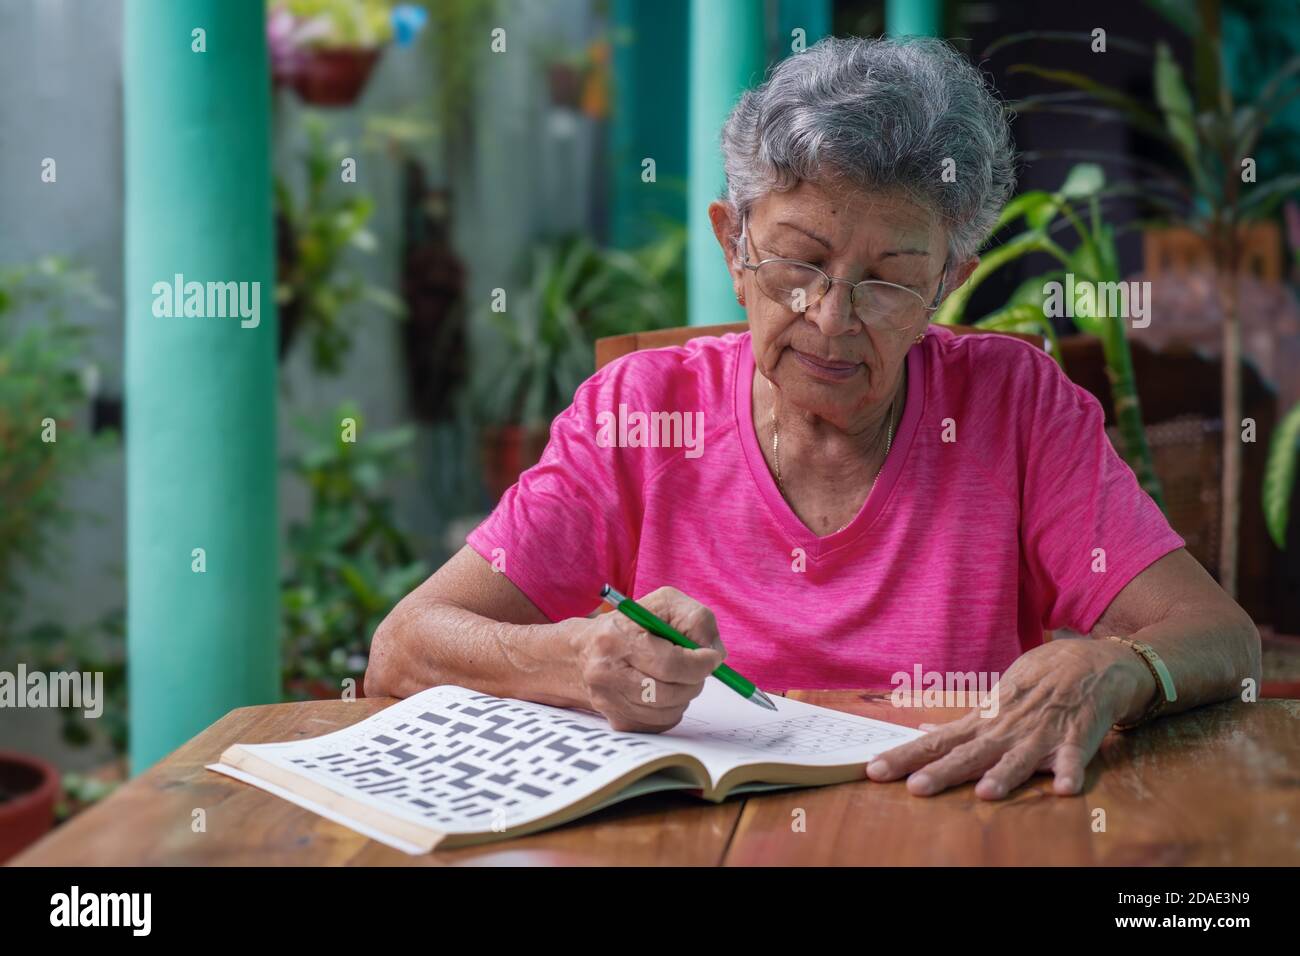 Senior woman with glasses sitting at a table, filling in a sudoku puzzle Stock Photo